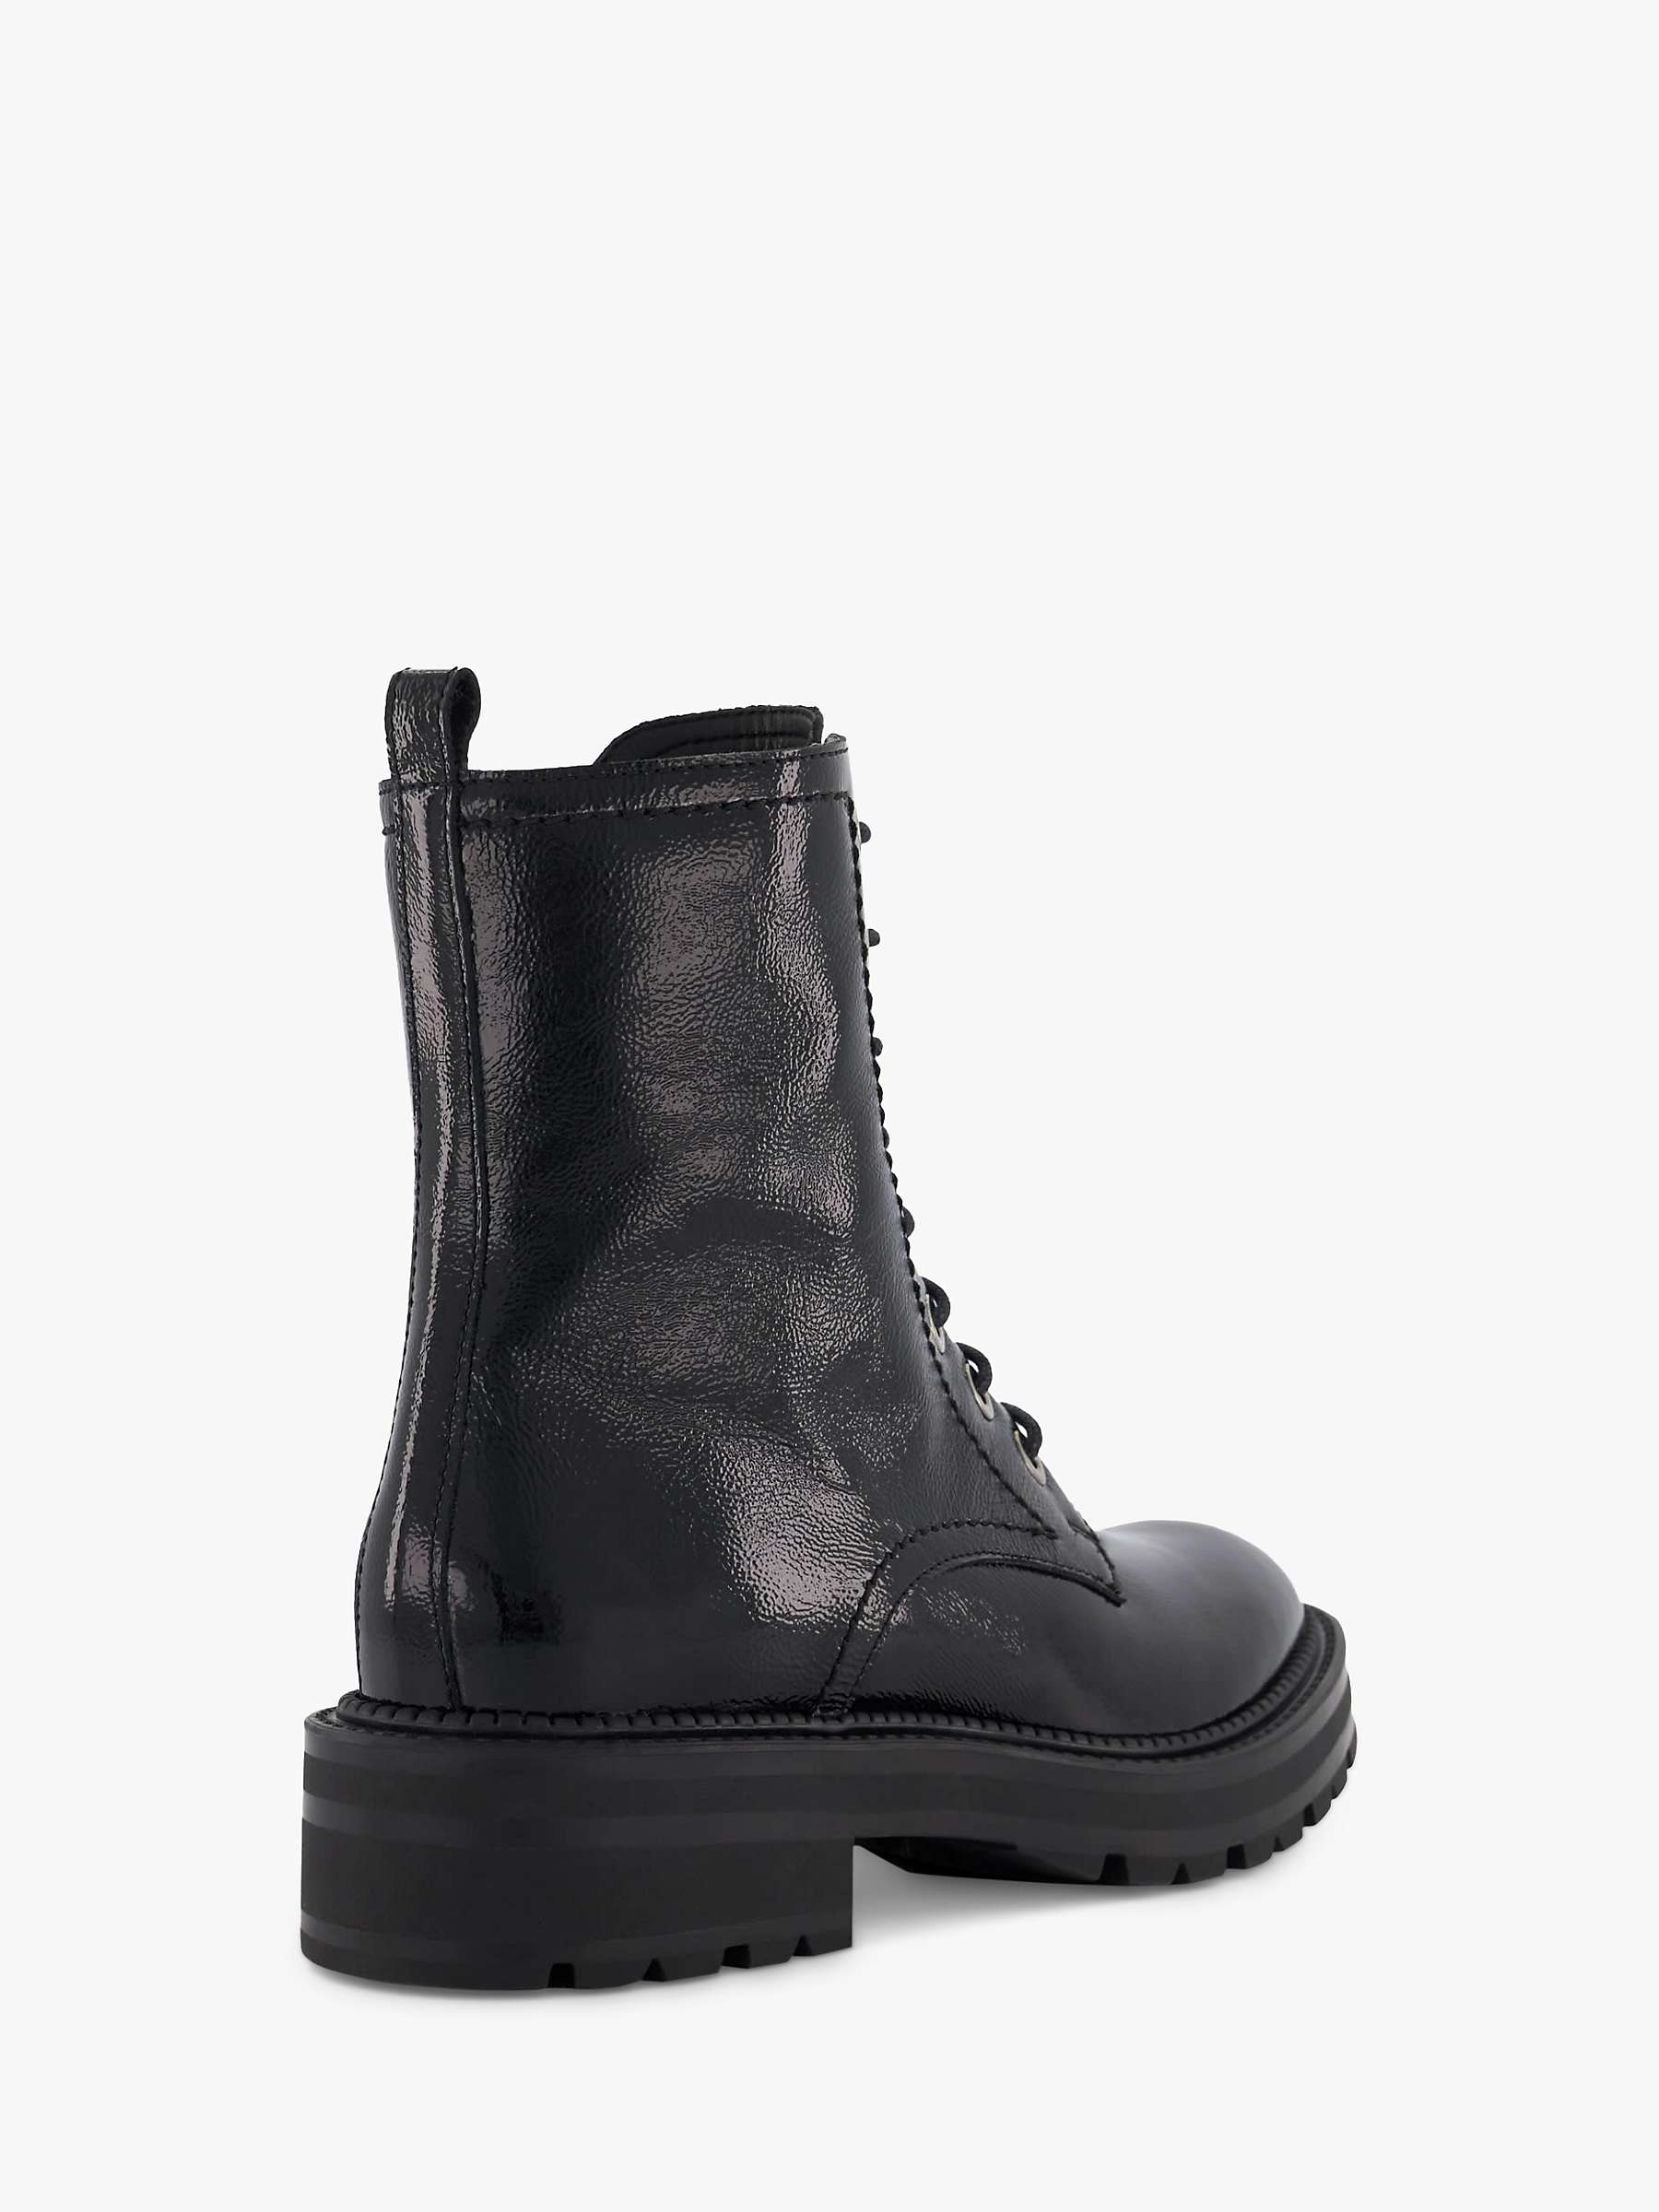 Buy Dune Press Leather Cleated Hiker Boots Online at johnlewis.com